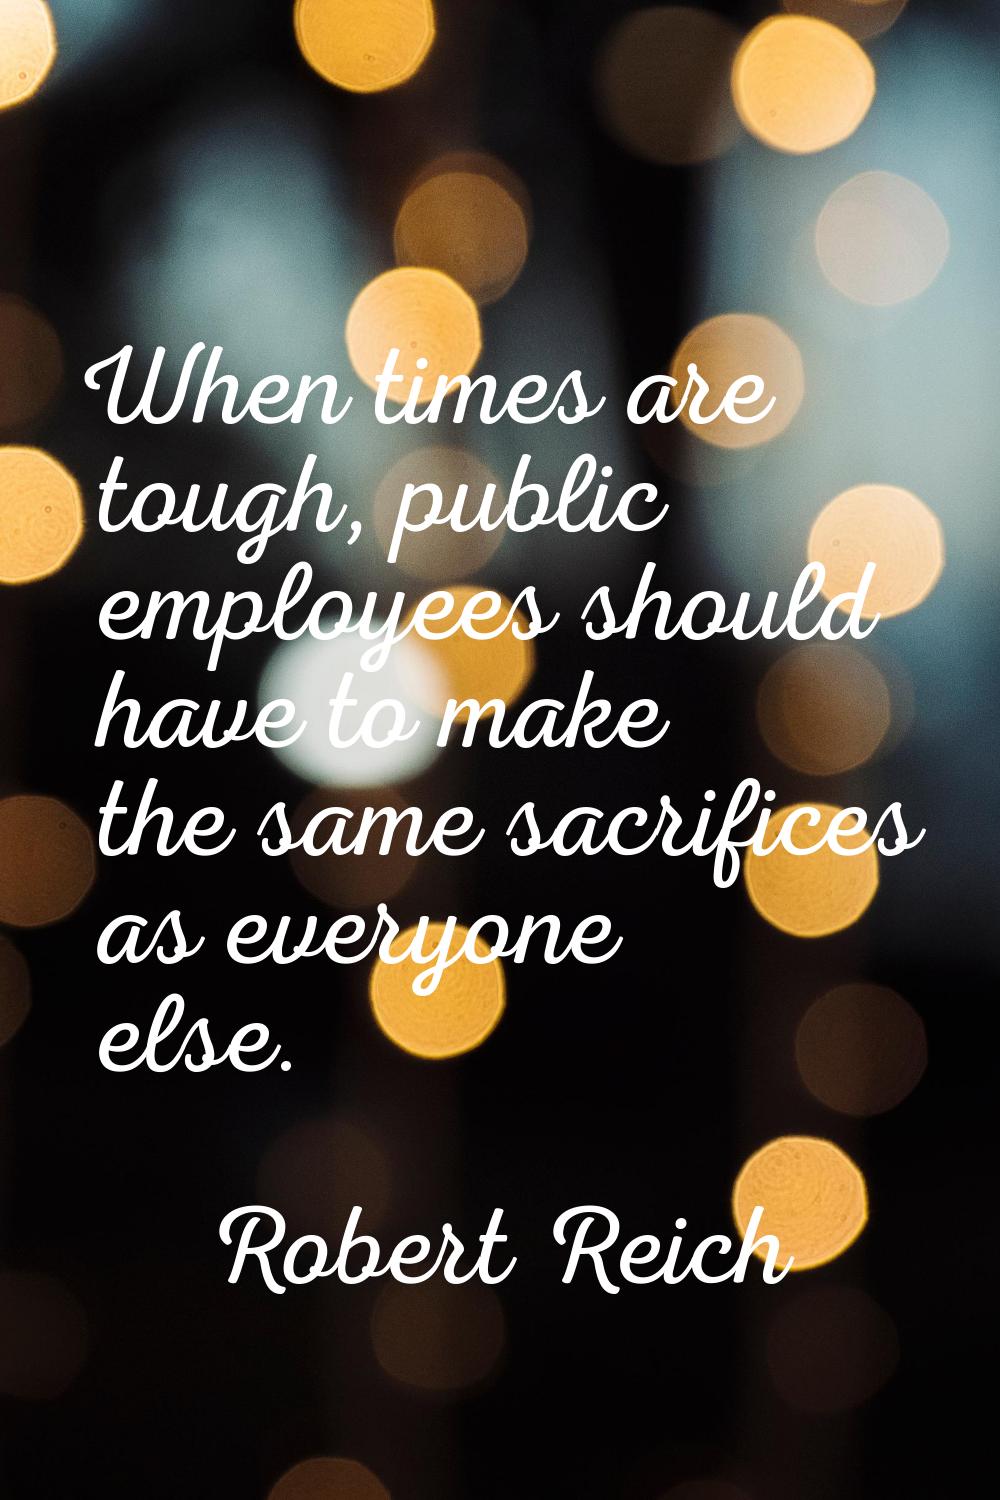 When times are tough, public employees should have to make the same sacrifices as everyone else.